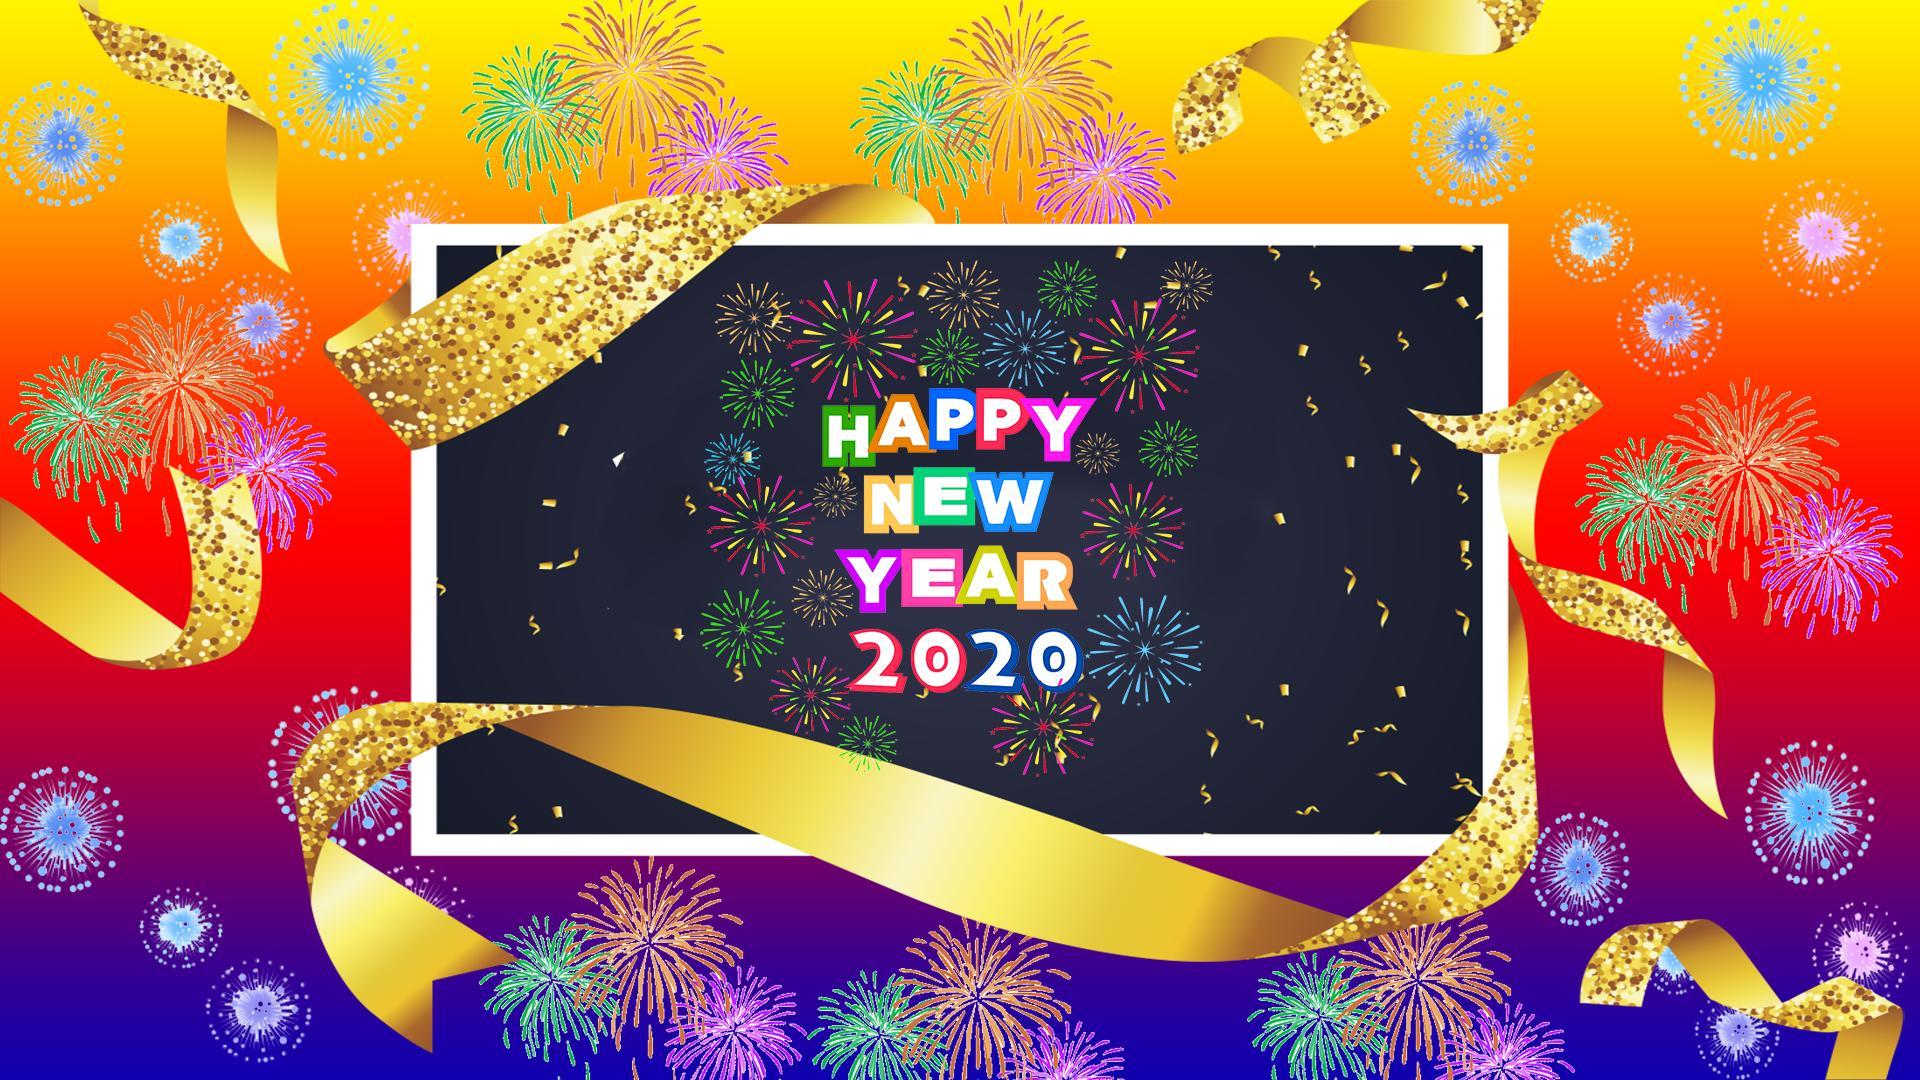 Happy new year 2020 CD banner background HD image